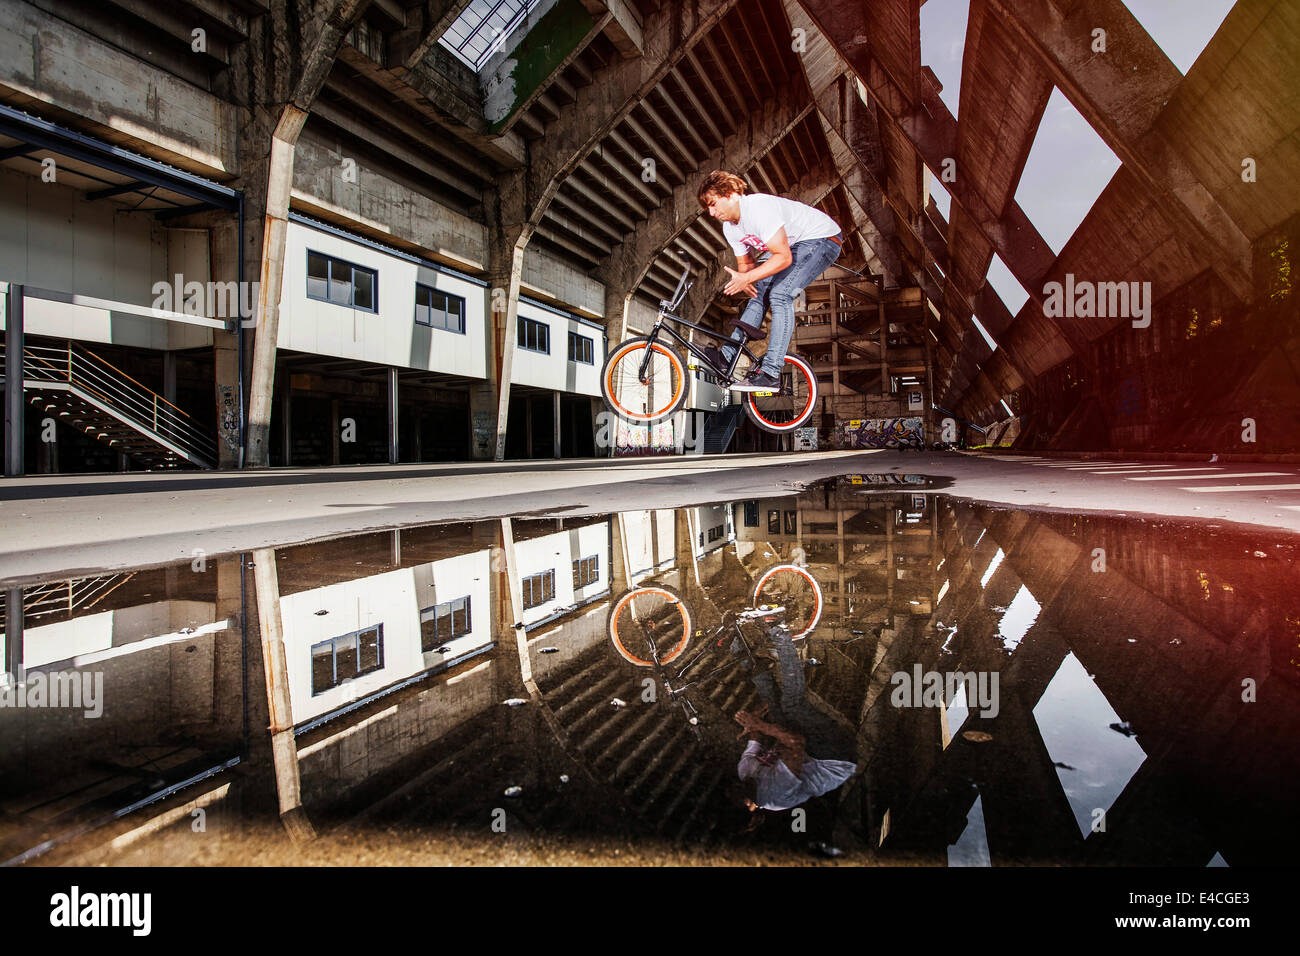 BMX biker performing a stunt over a puddle Stock Photo